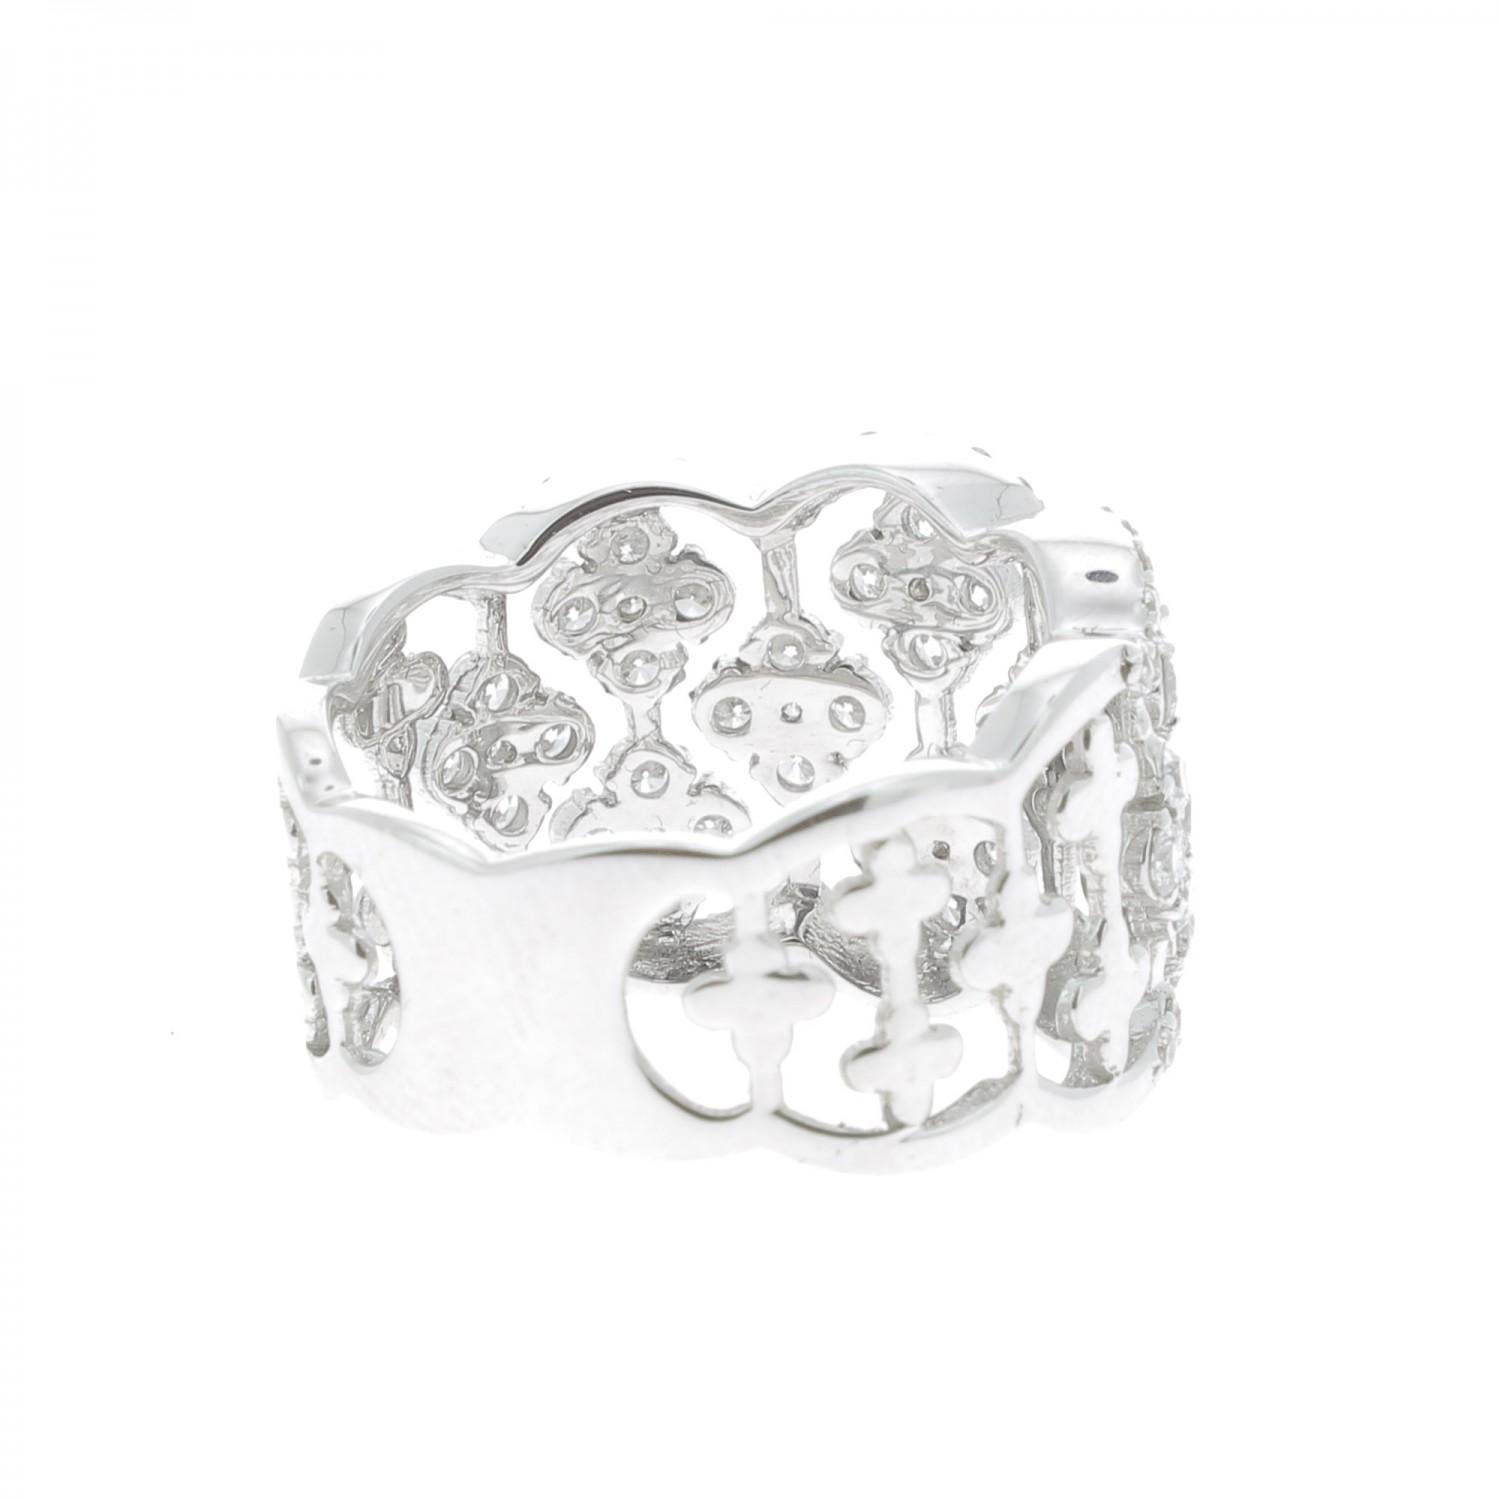 Contemporary 1.42 Carat Round Diamond Clover Ring 18 Karat White Gold Band Fashion Ring For Sale